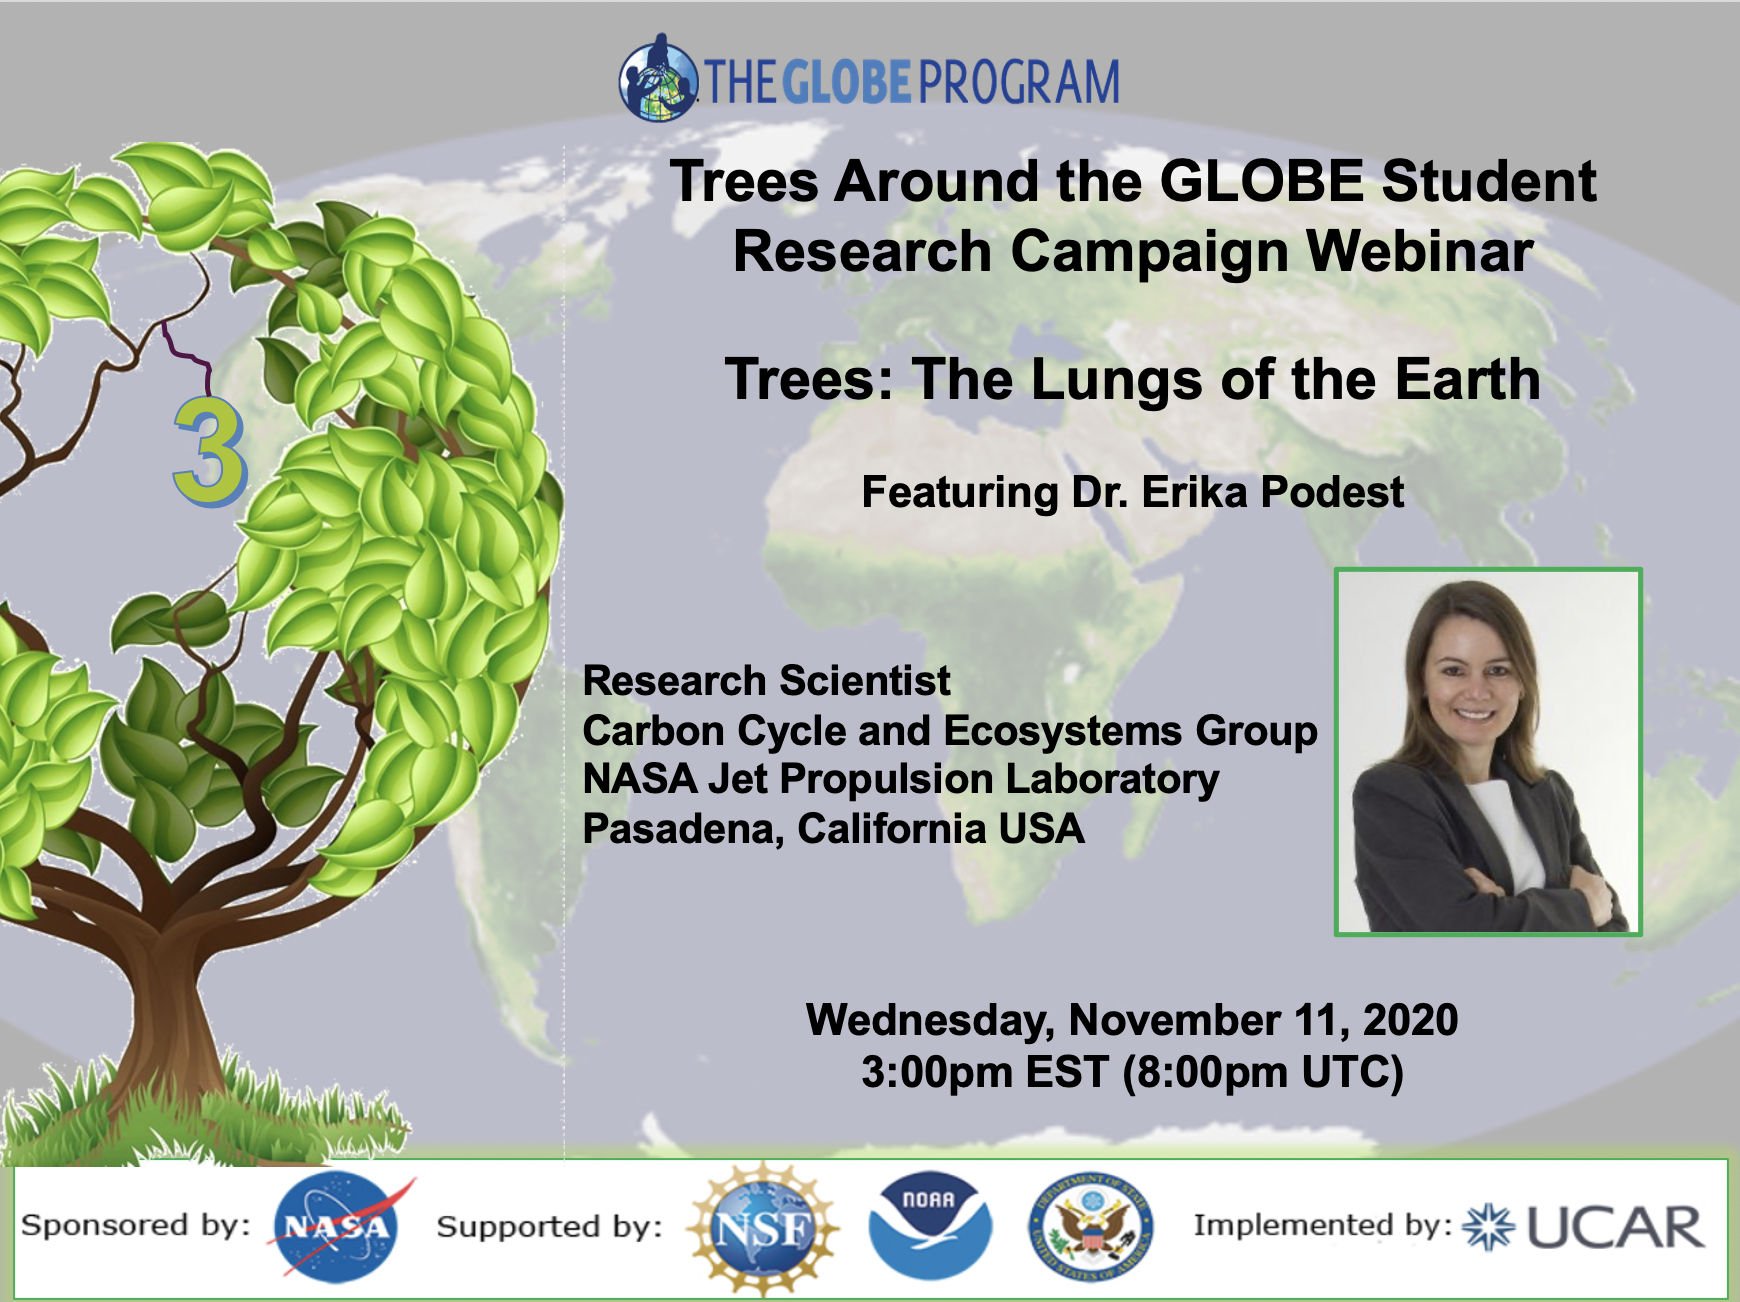 Trees Around the GLOBE Student Research Campaign 11 November webinar shareable